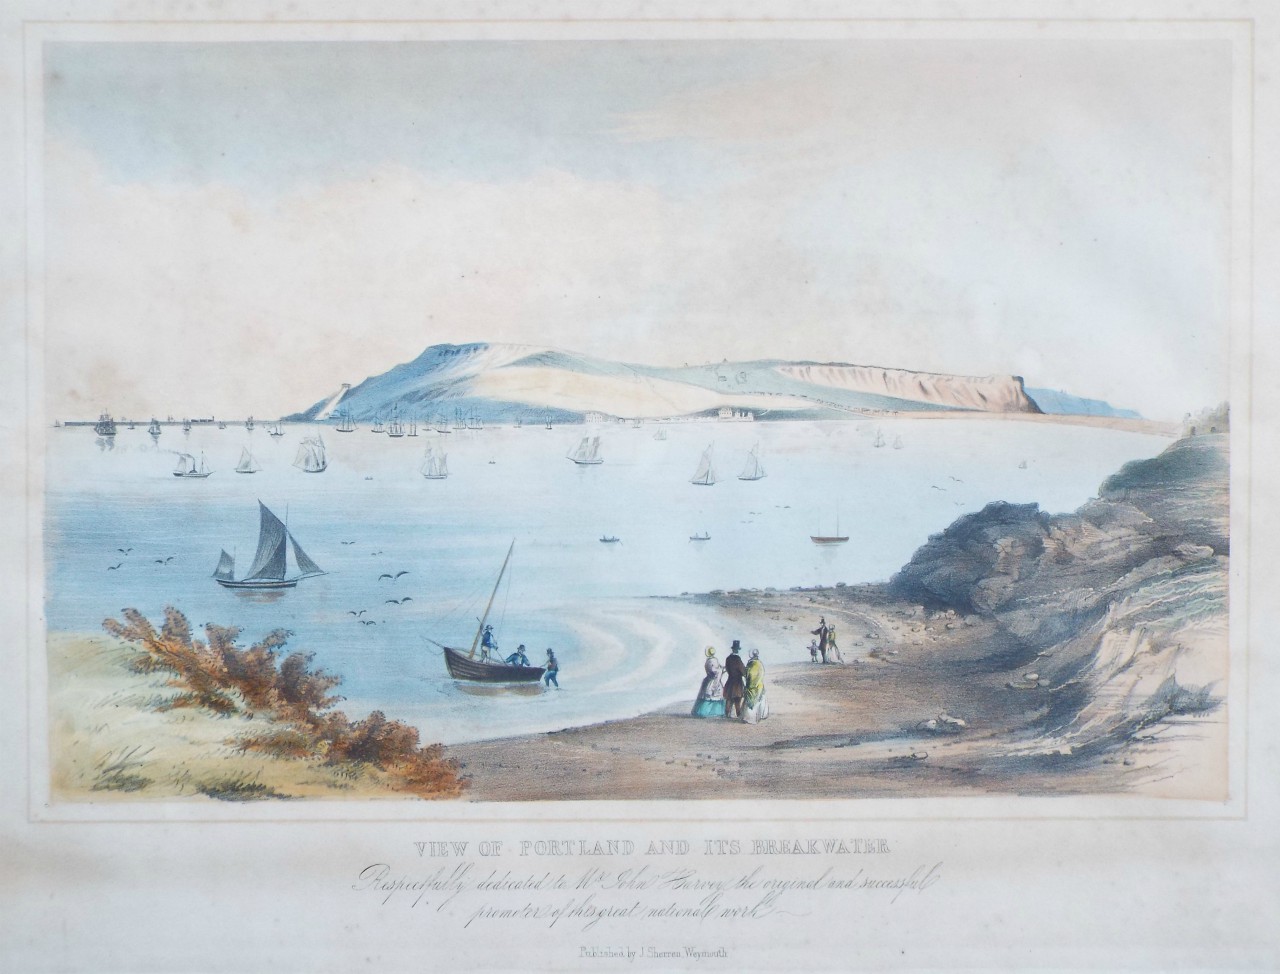 Lithograph - View of Portland and its Breakwater